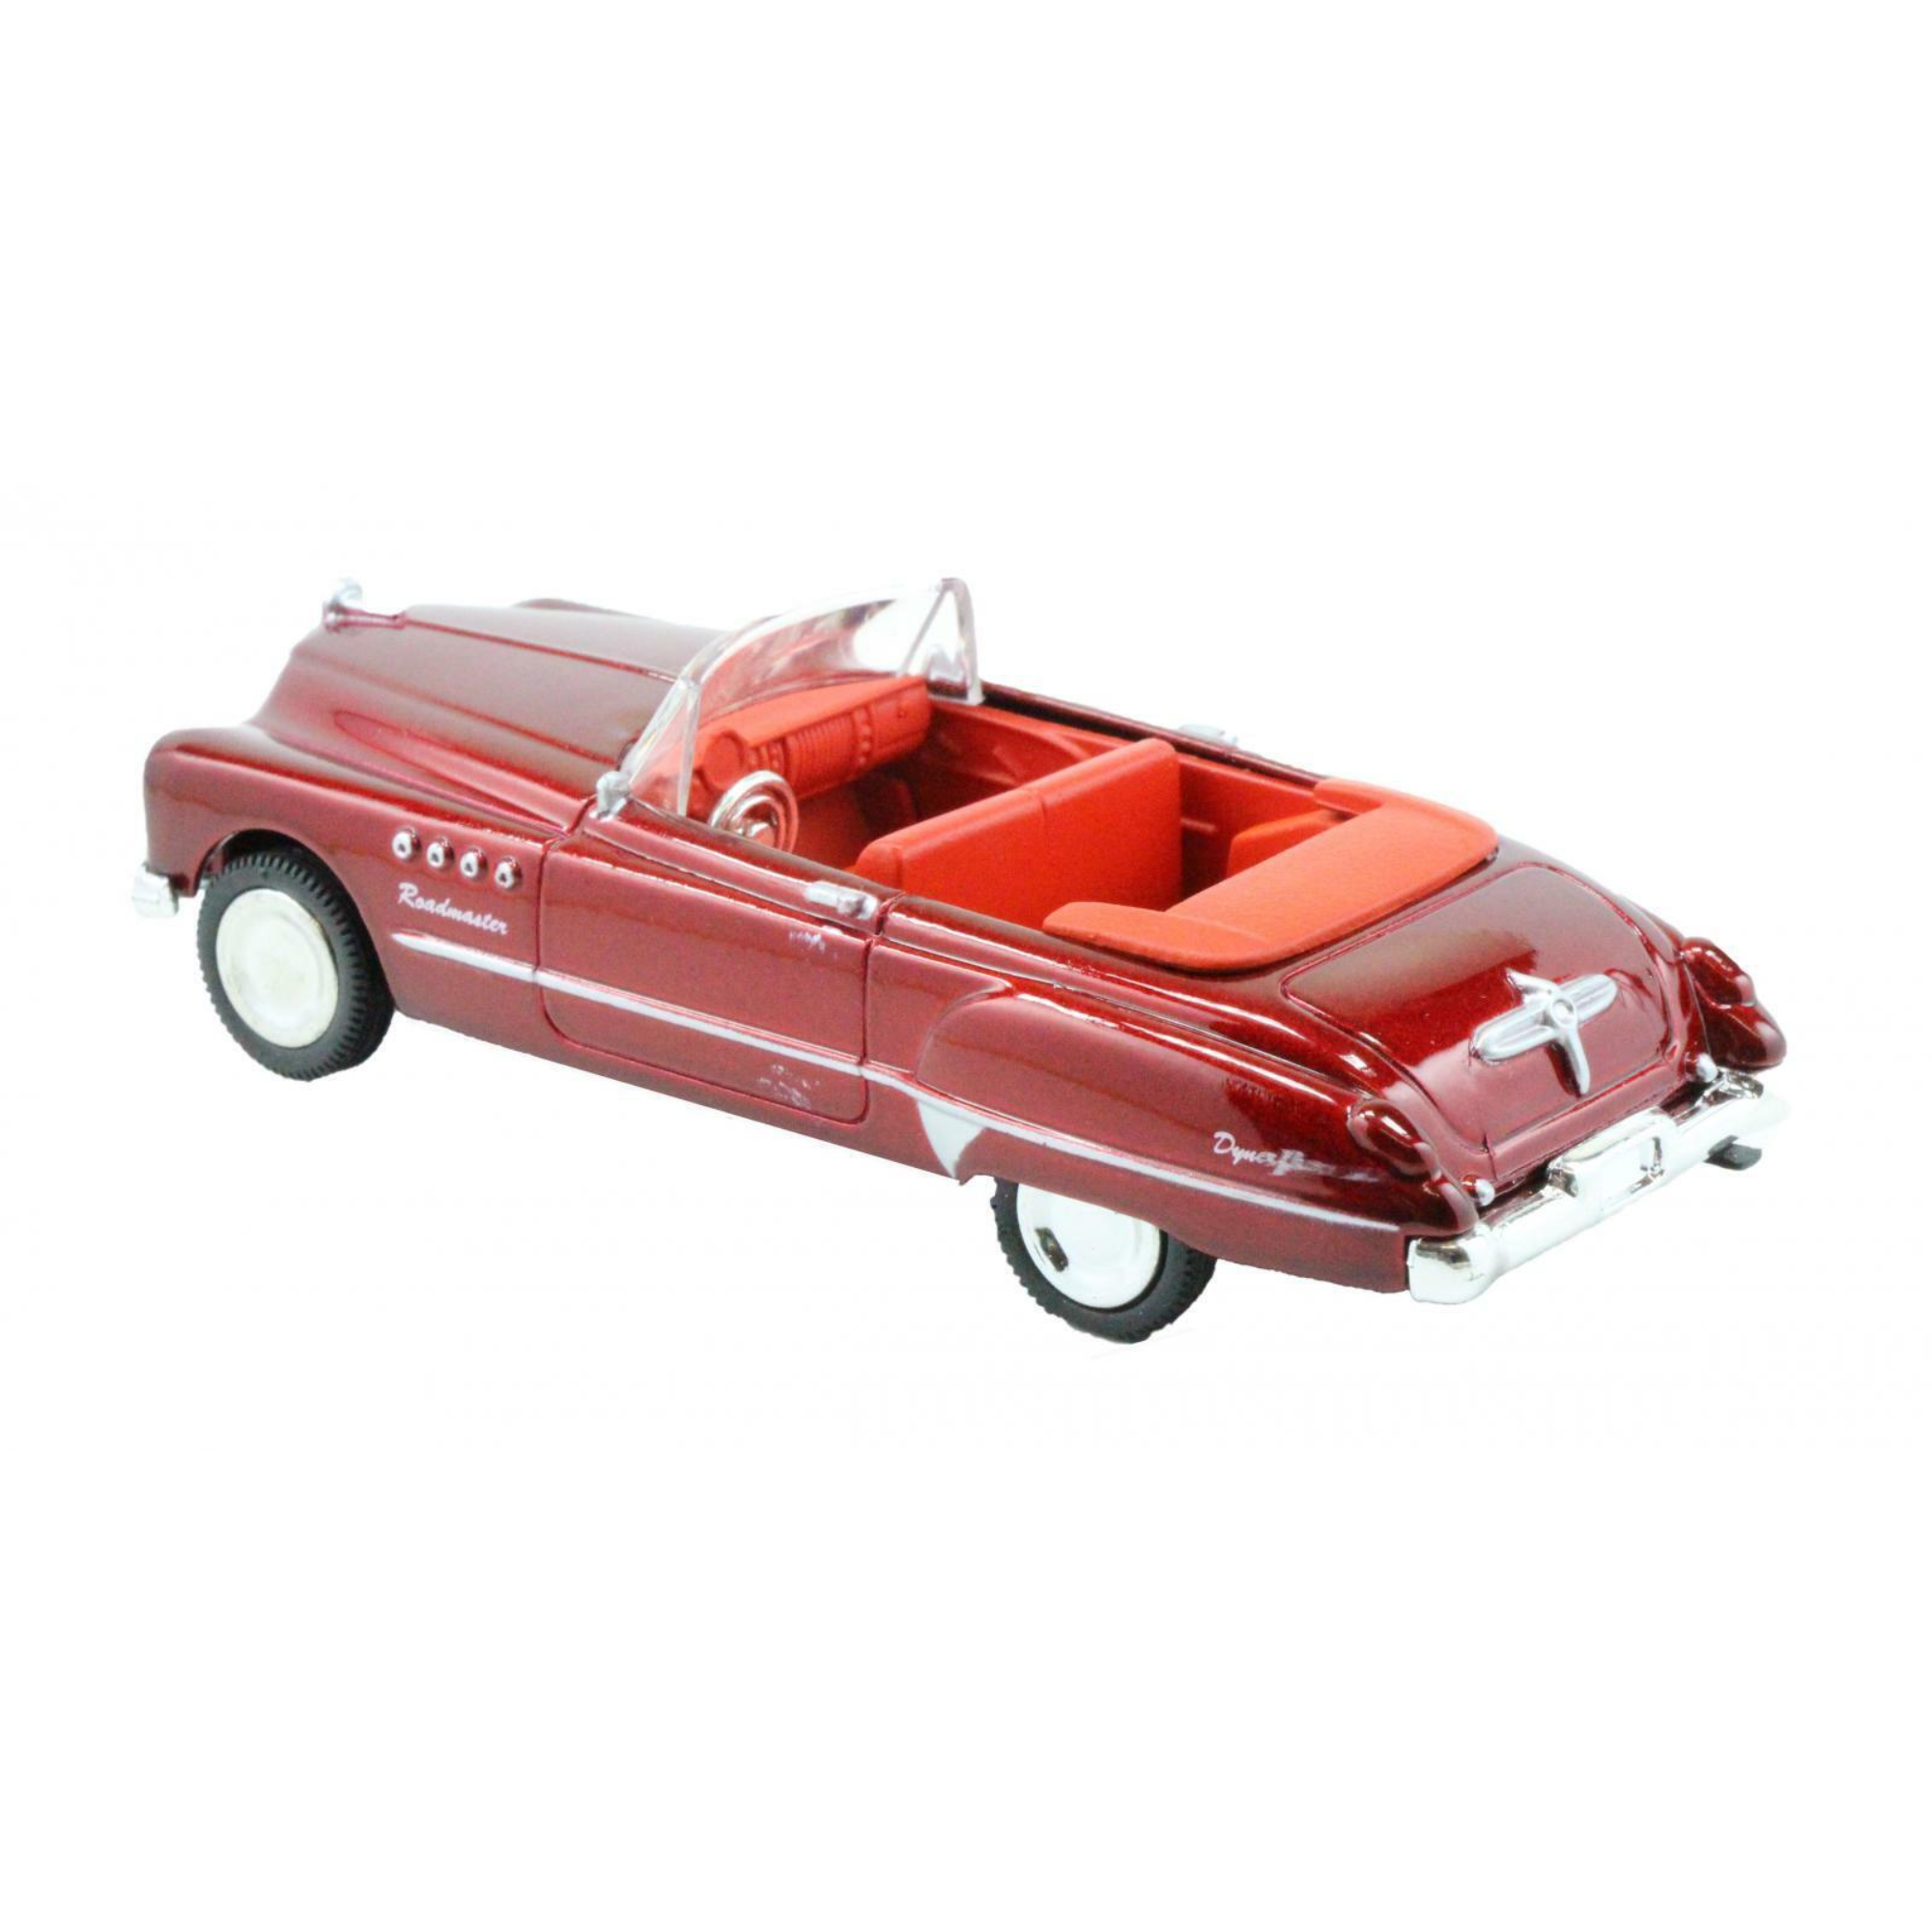 New Ray 1:43 Diecast Roadmaster Dynaflow Cabriolet 1949 Red - All American City Cruiser Collection - Toptoys2u